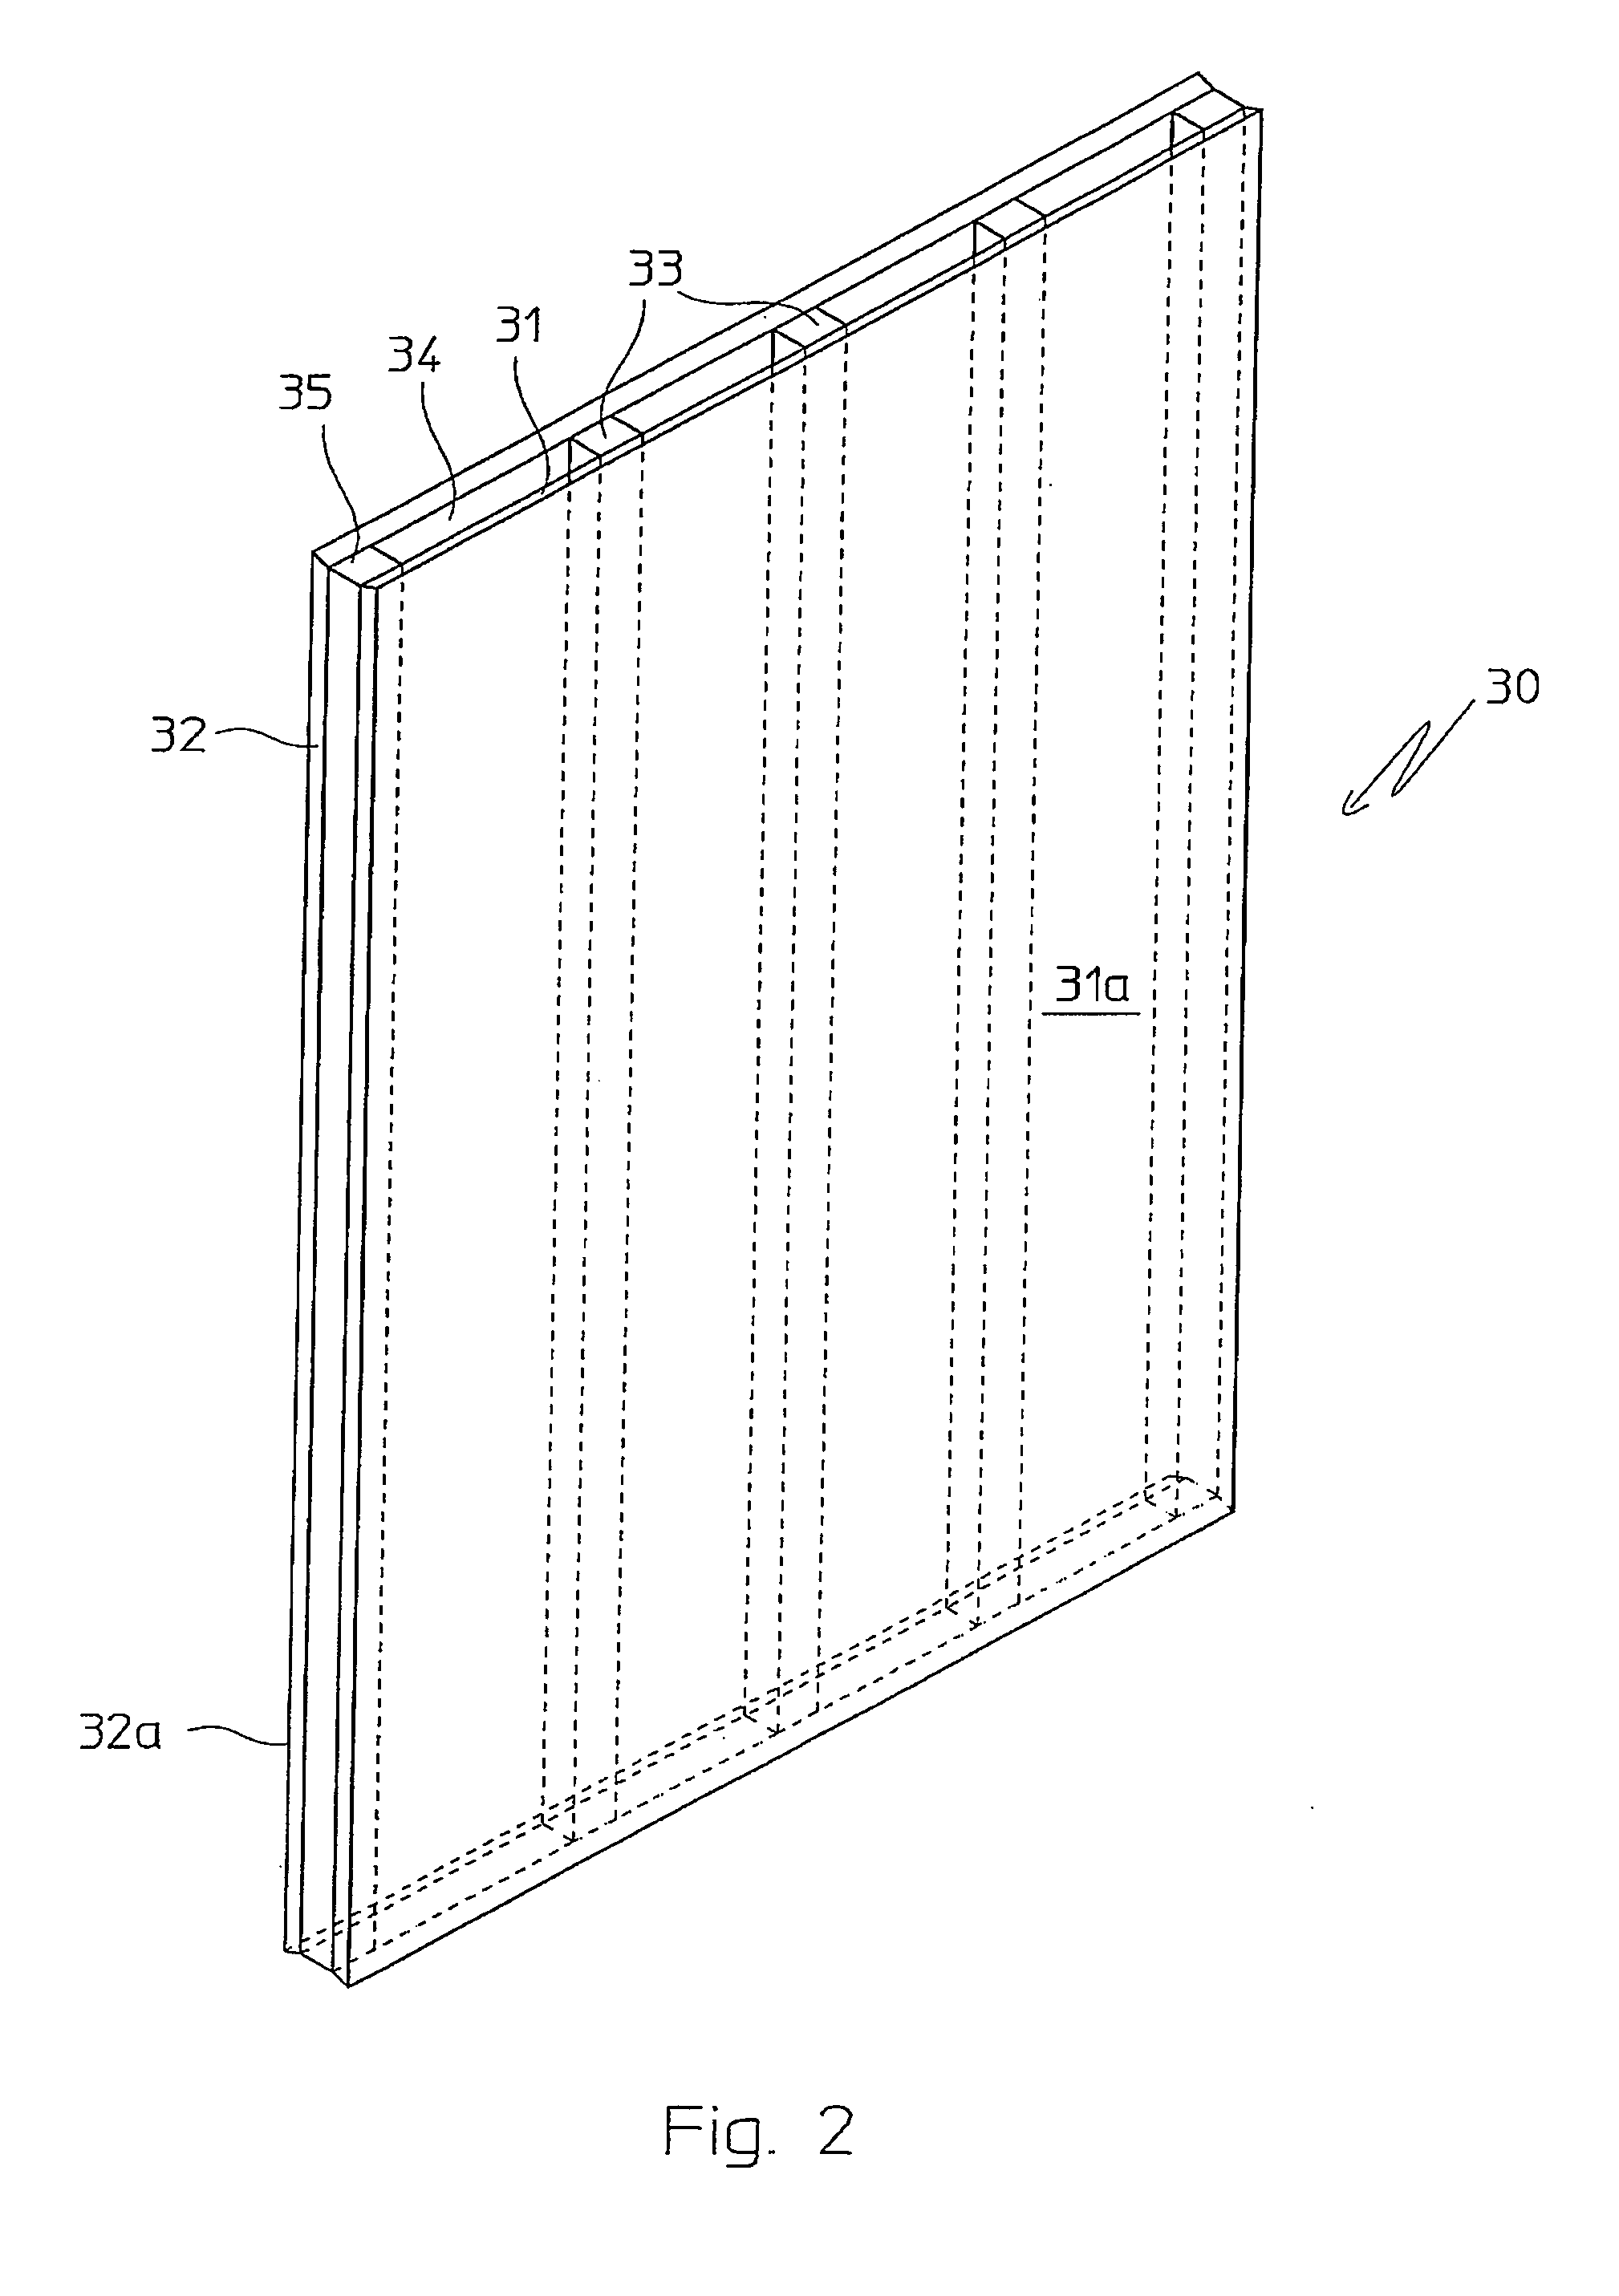 Chemical Reactor with Plate Type Heat Exchange Unit